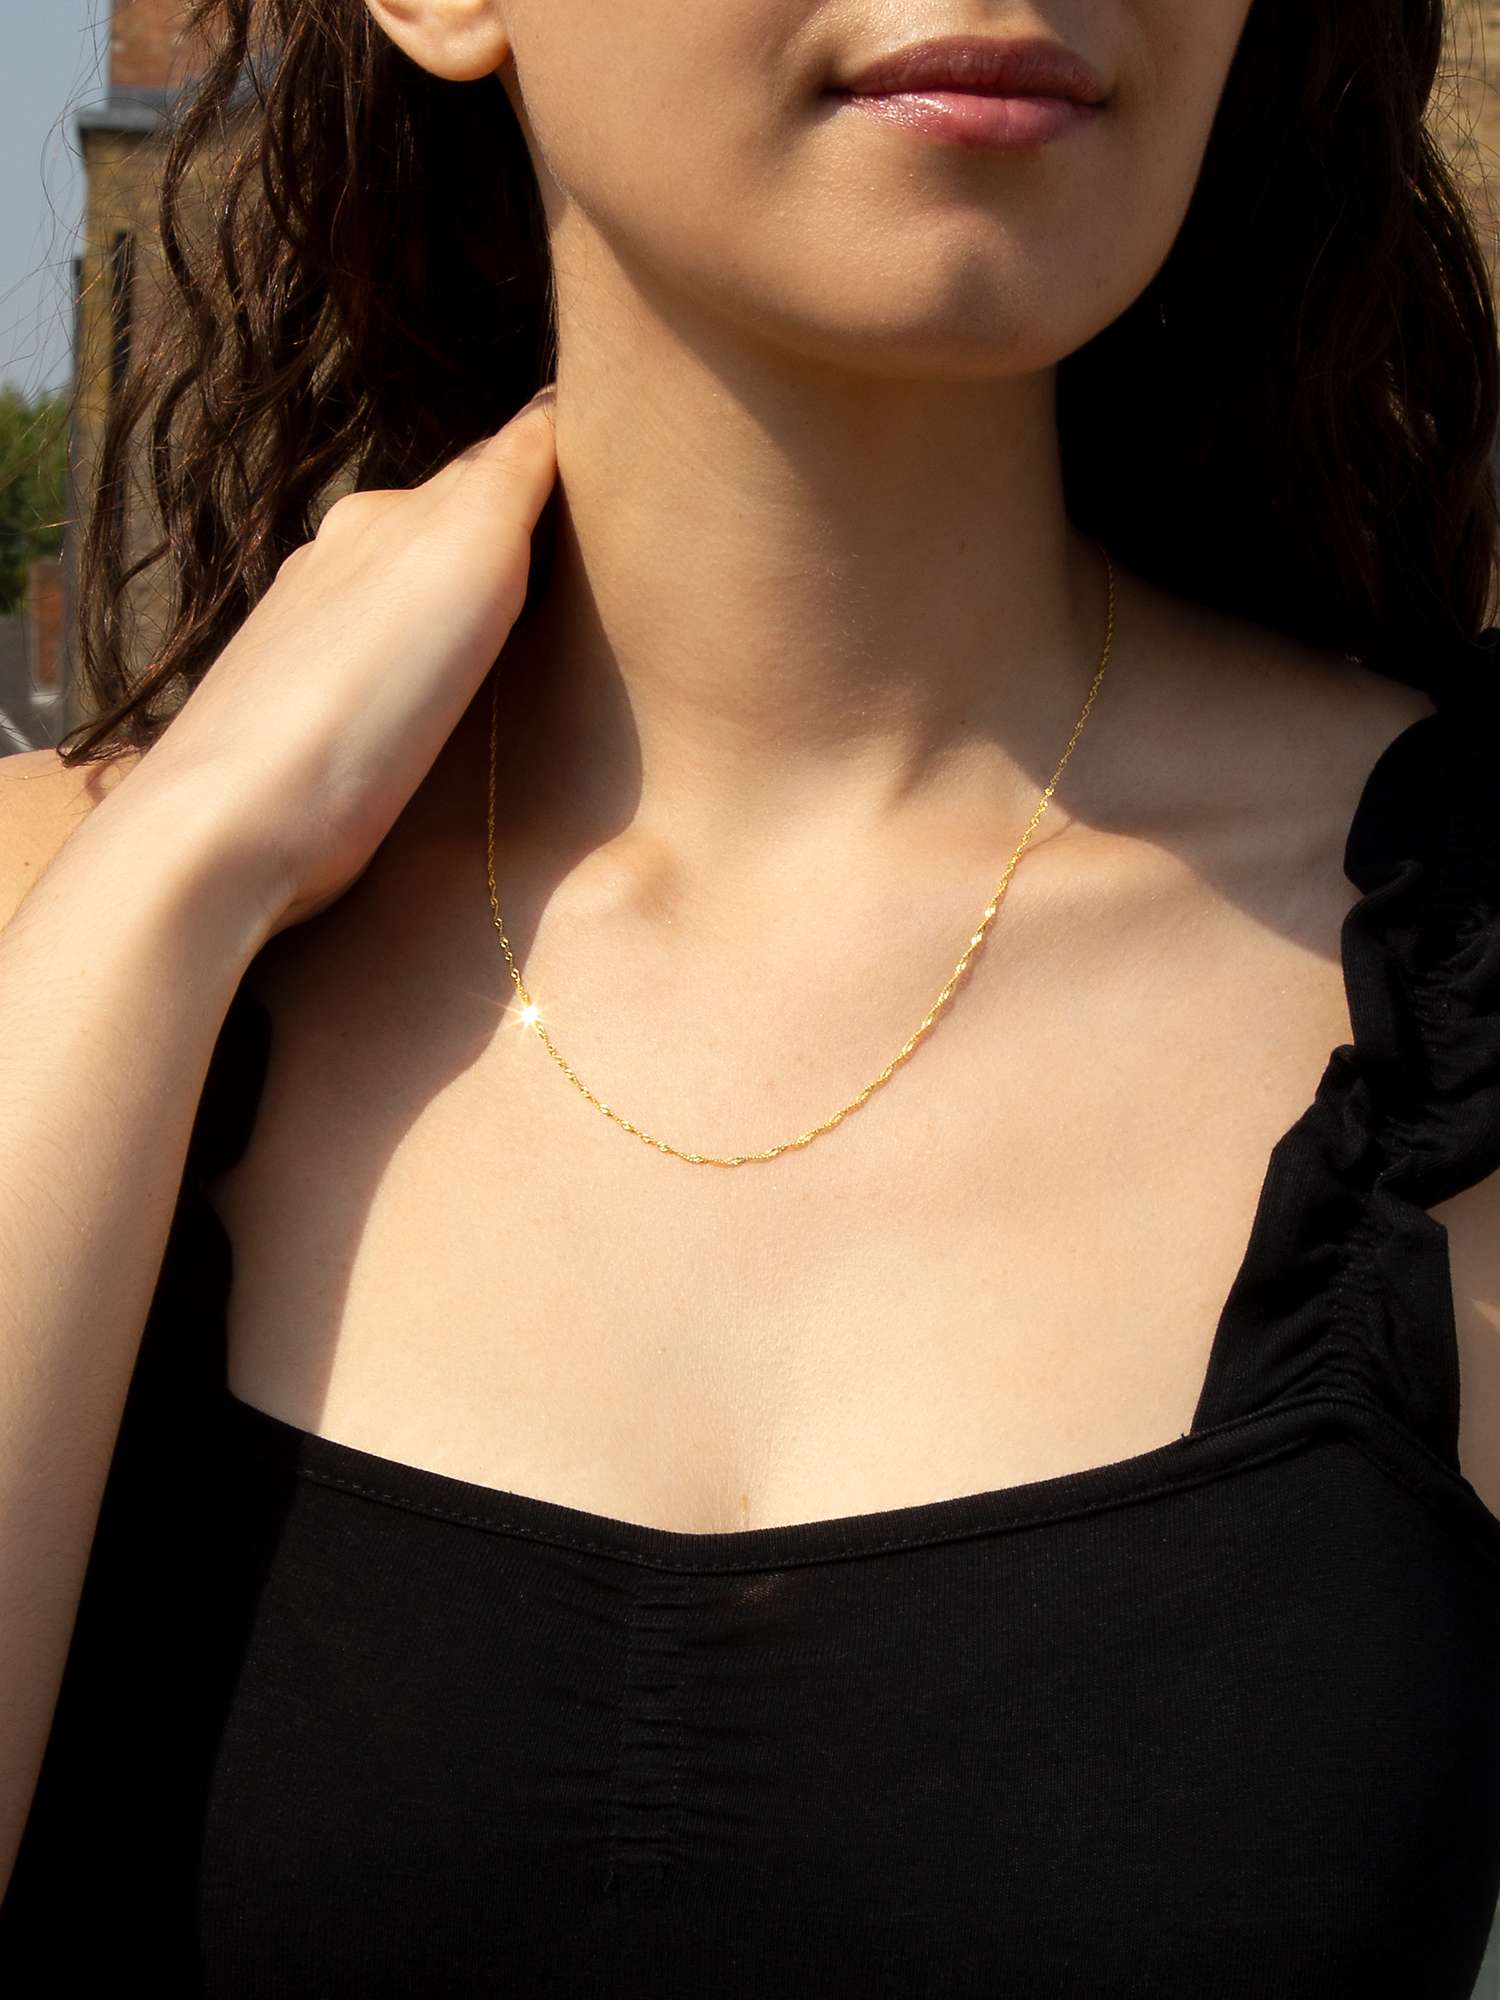 Buy IBB 9ct Yellow Gold Long Twist Link Chain Necklace, Gold Online at johnlewis.com